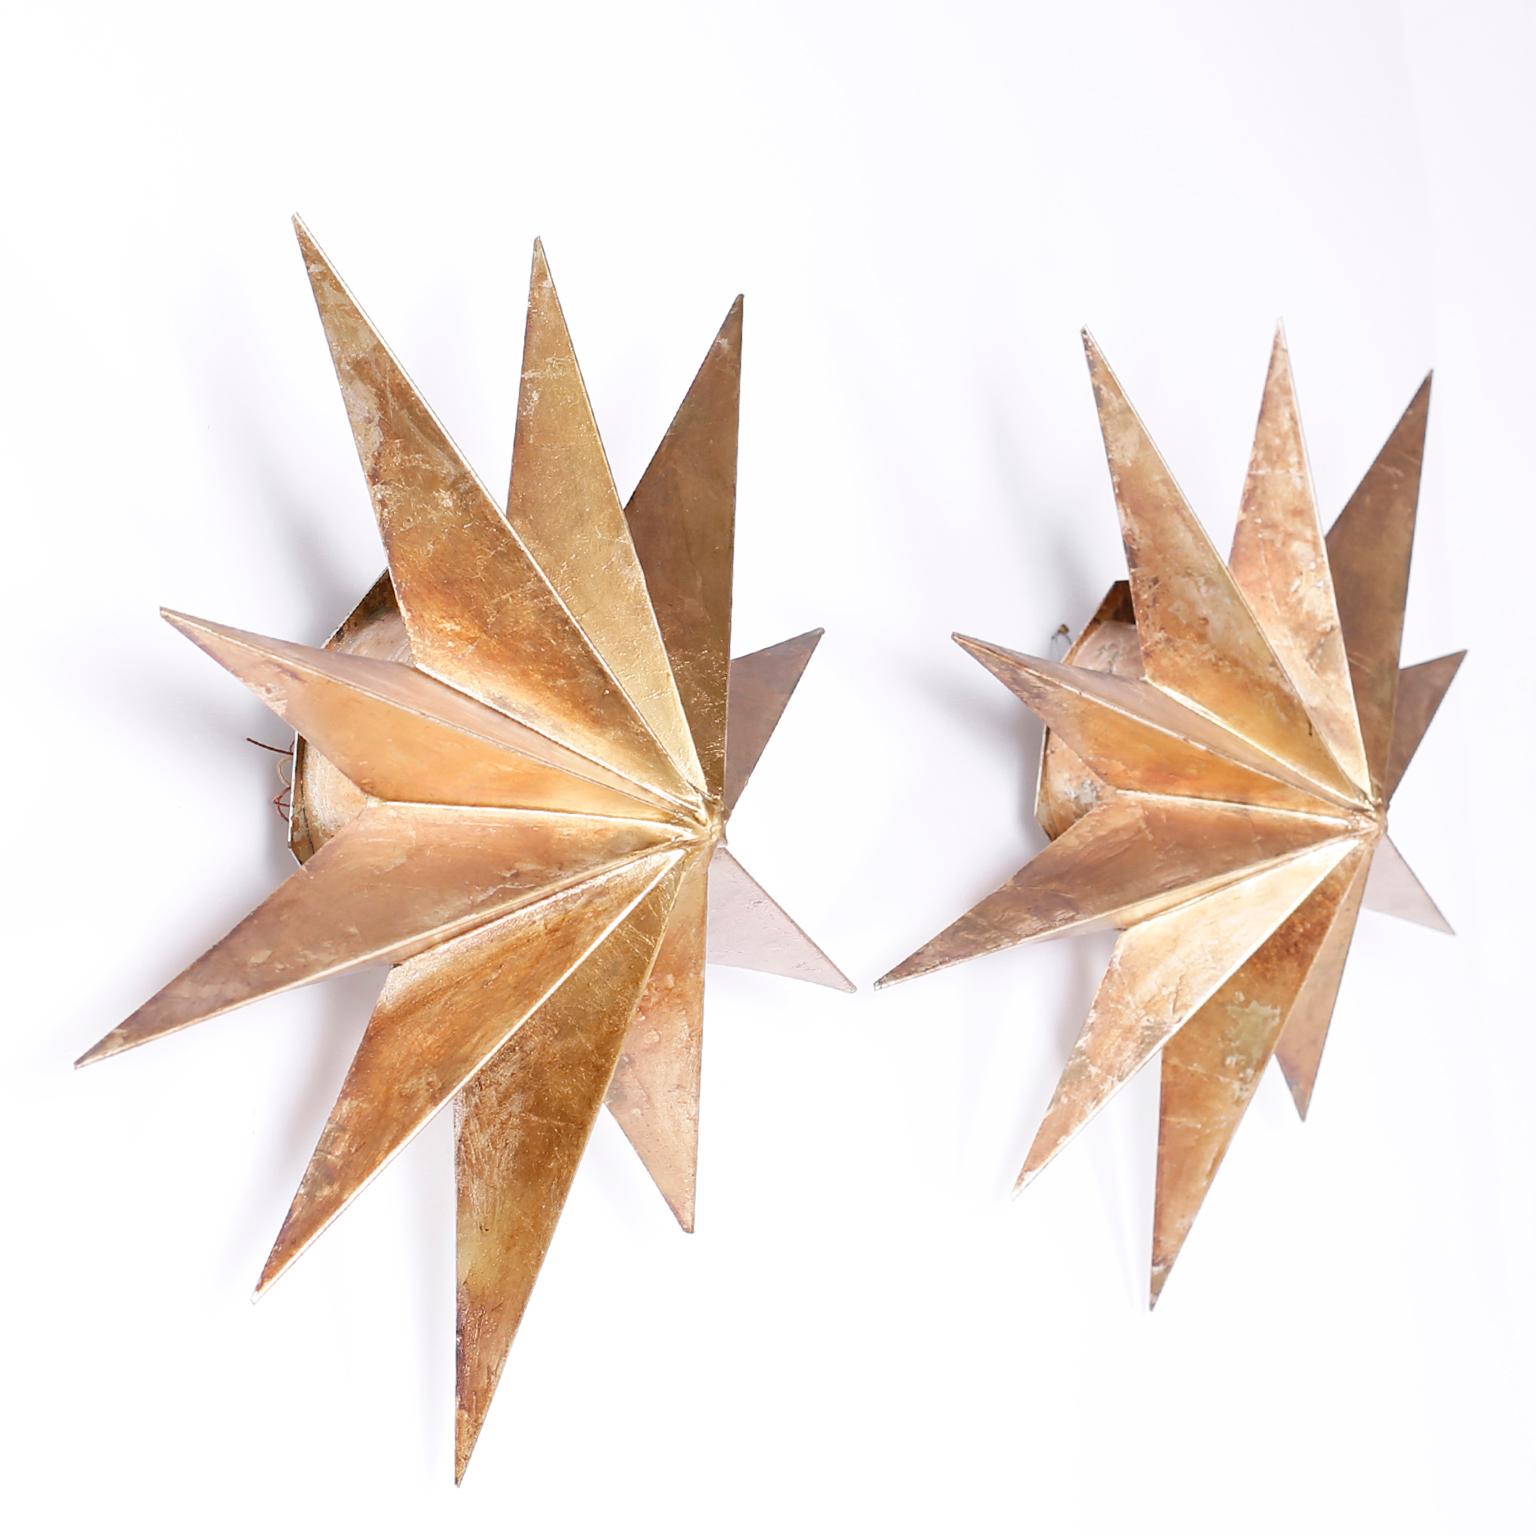 Pair of midcentury star form wall sconces with ten points, each crafted in aluminum with a gold leaf finish and spray lighting from behind. Newly wired.